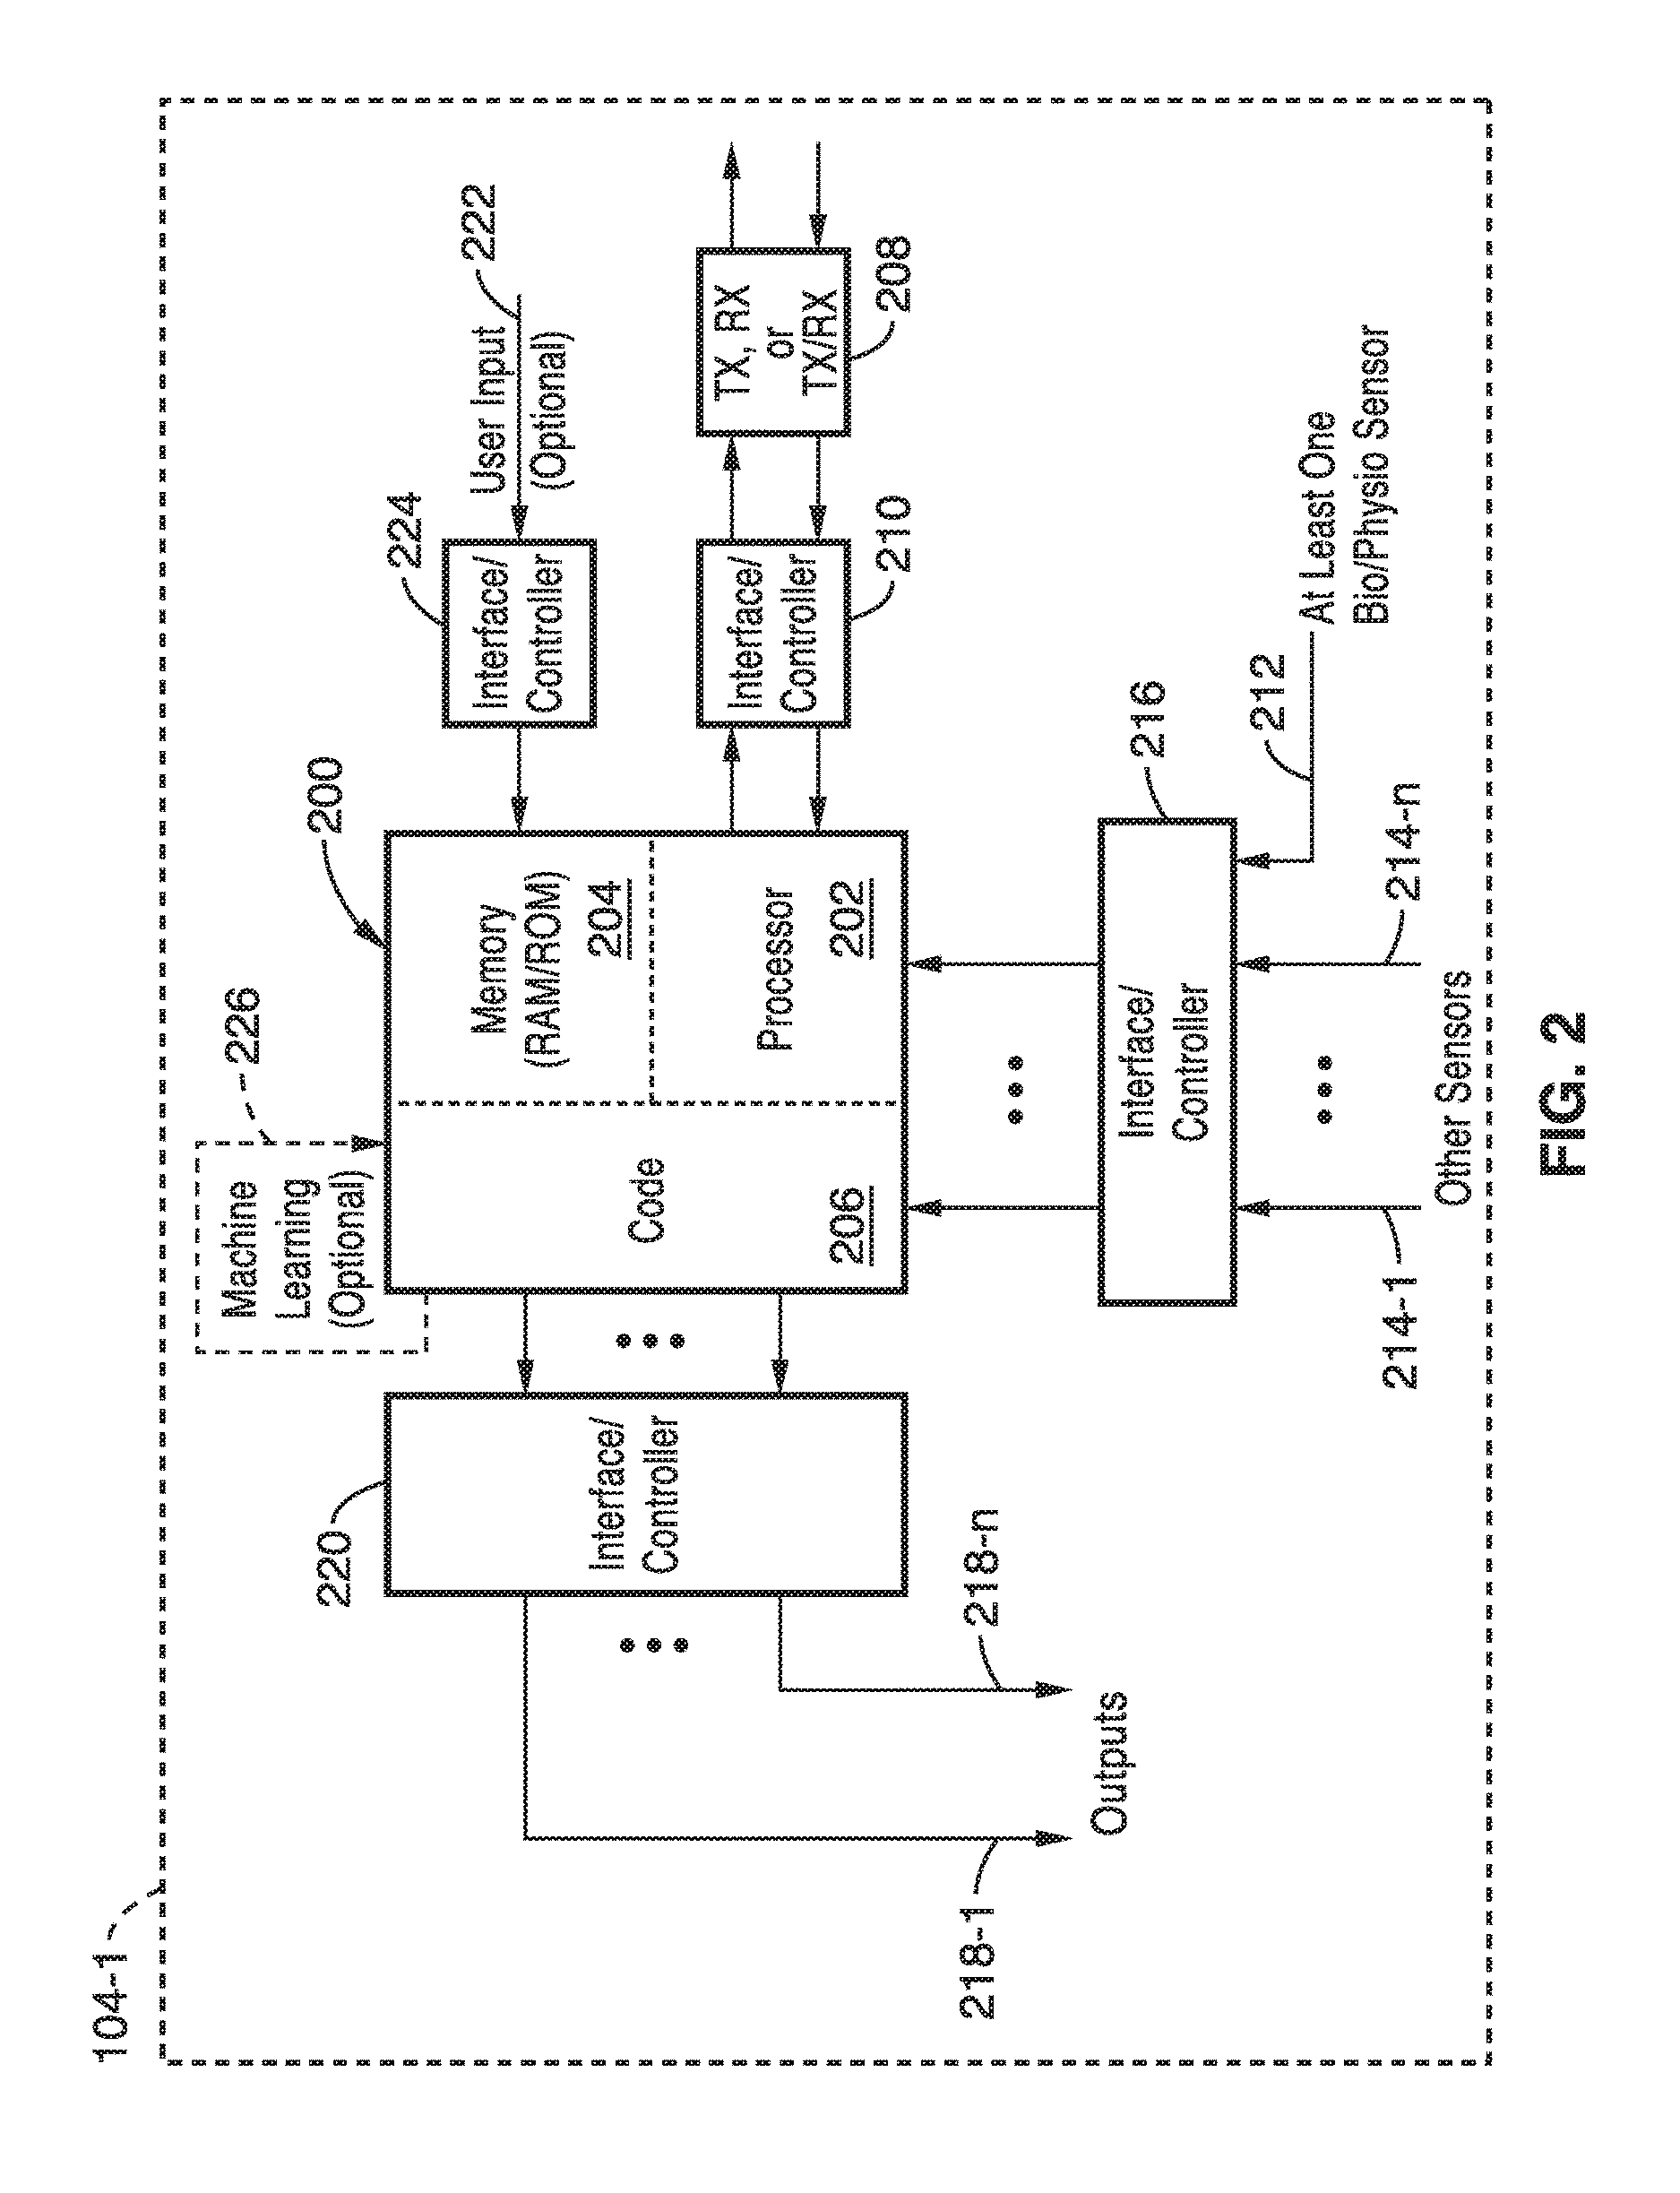 Smart wearable devices and methods with power consumption and network load optimization